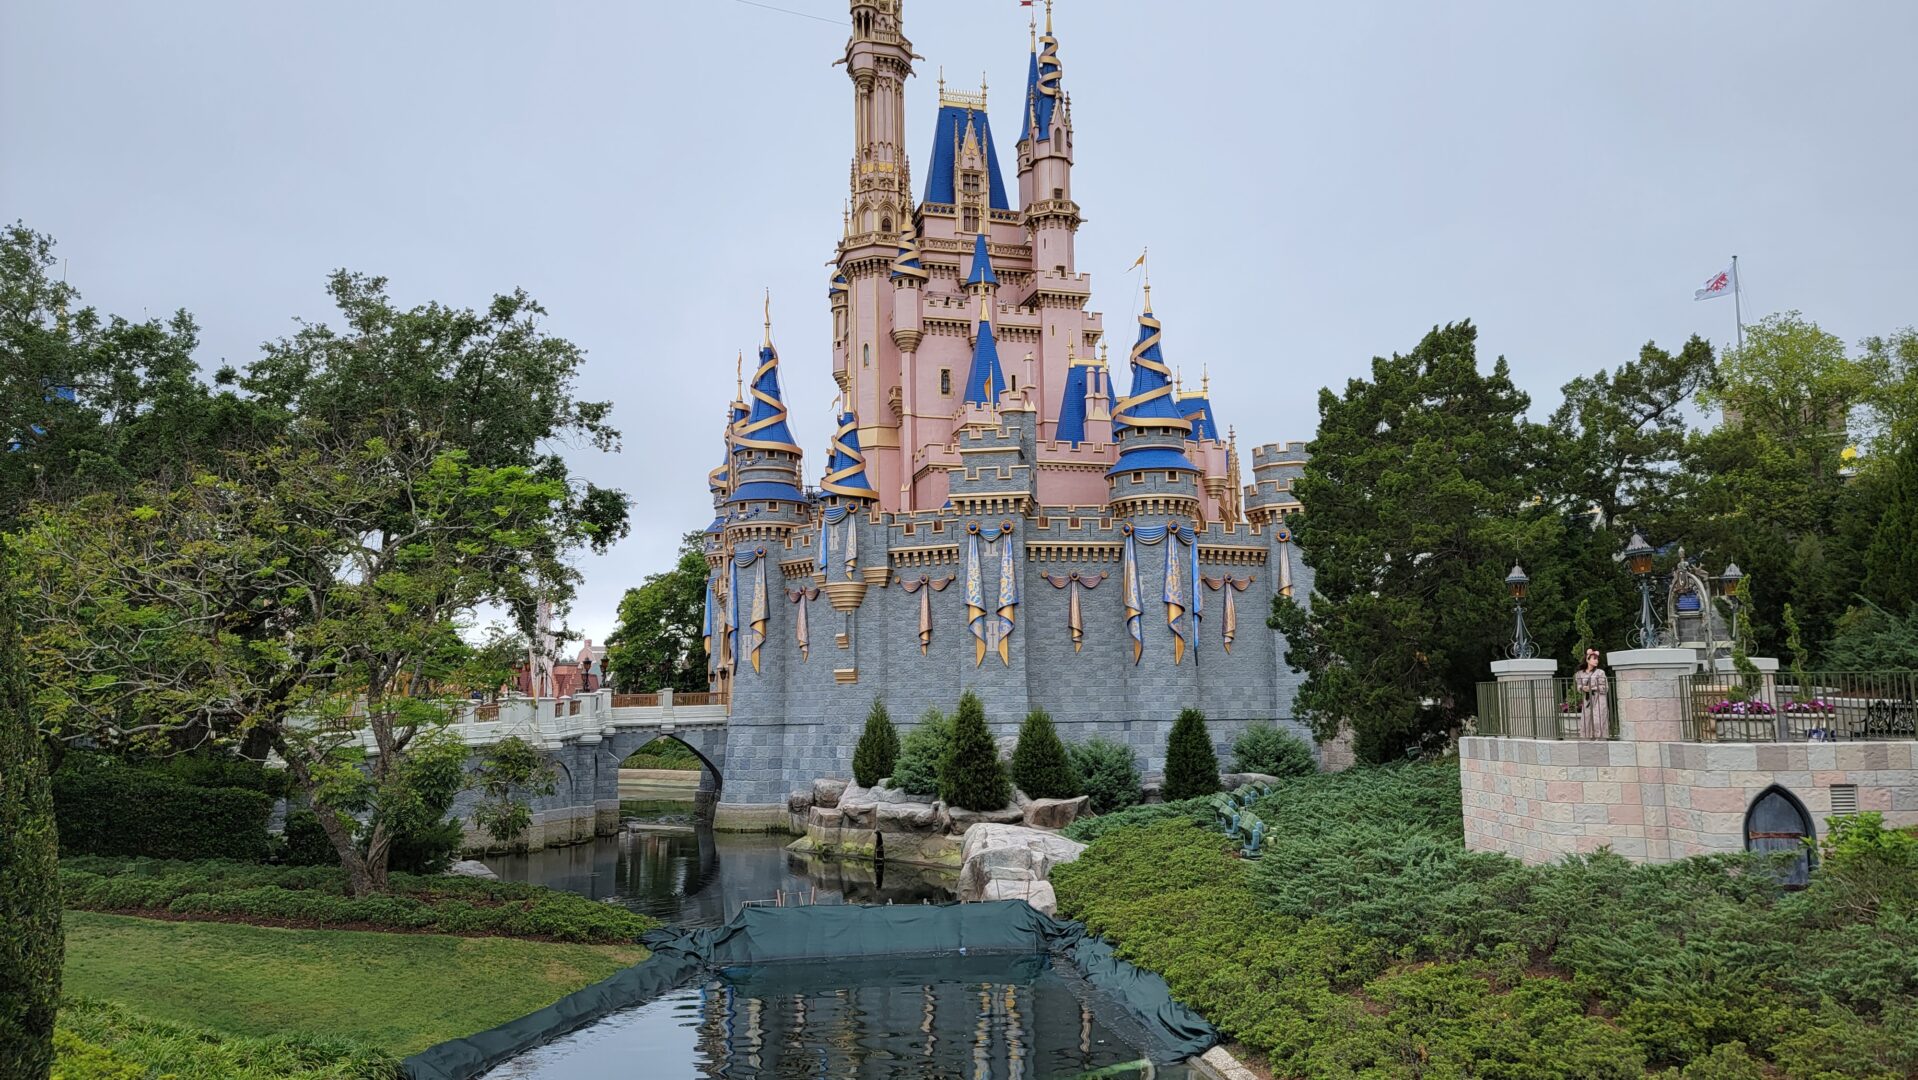 Cinderella Castle Moat Drained as Remaining Disney World 50th Decorations Prepare to be Removed